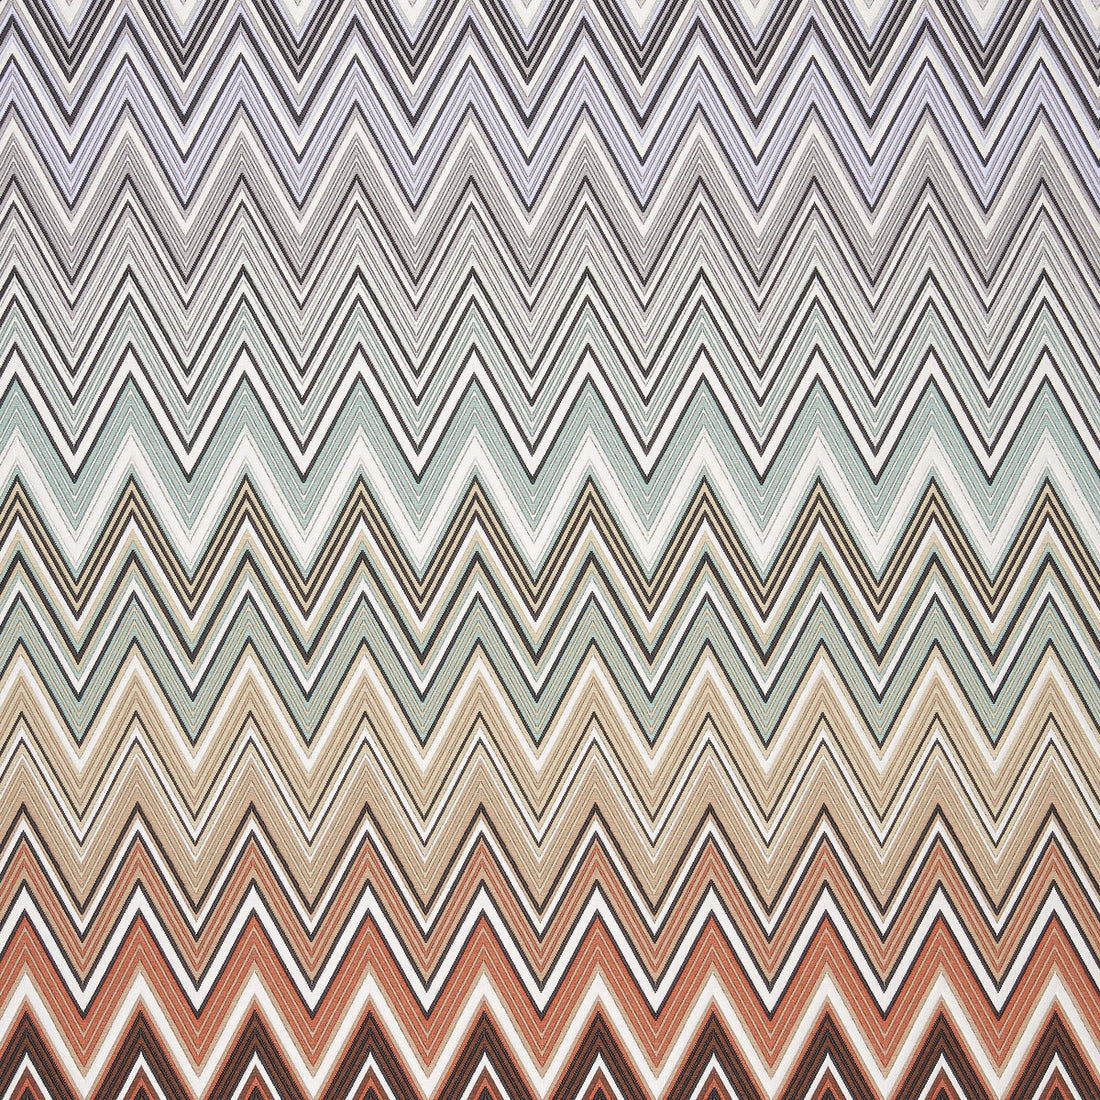 Birmingham Fr fabric in 160 color - pattern 36710.1512.0 - by Kravet Couture in the Missoni Home collection